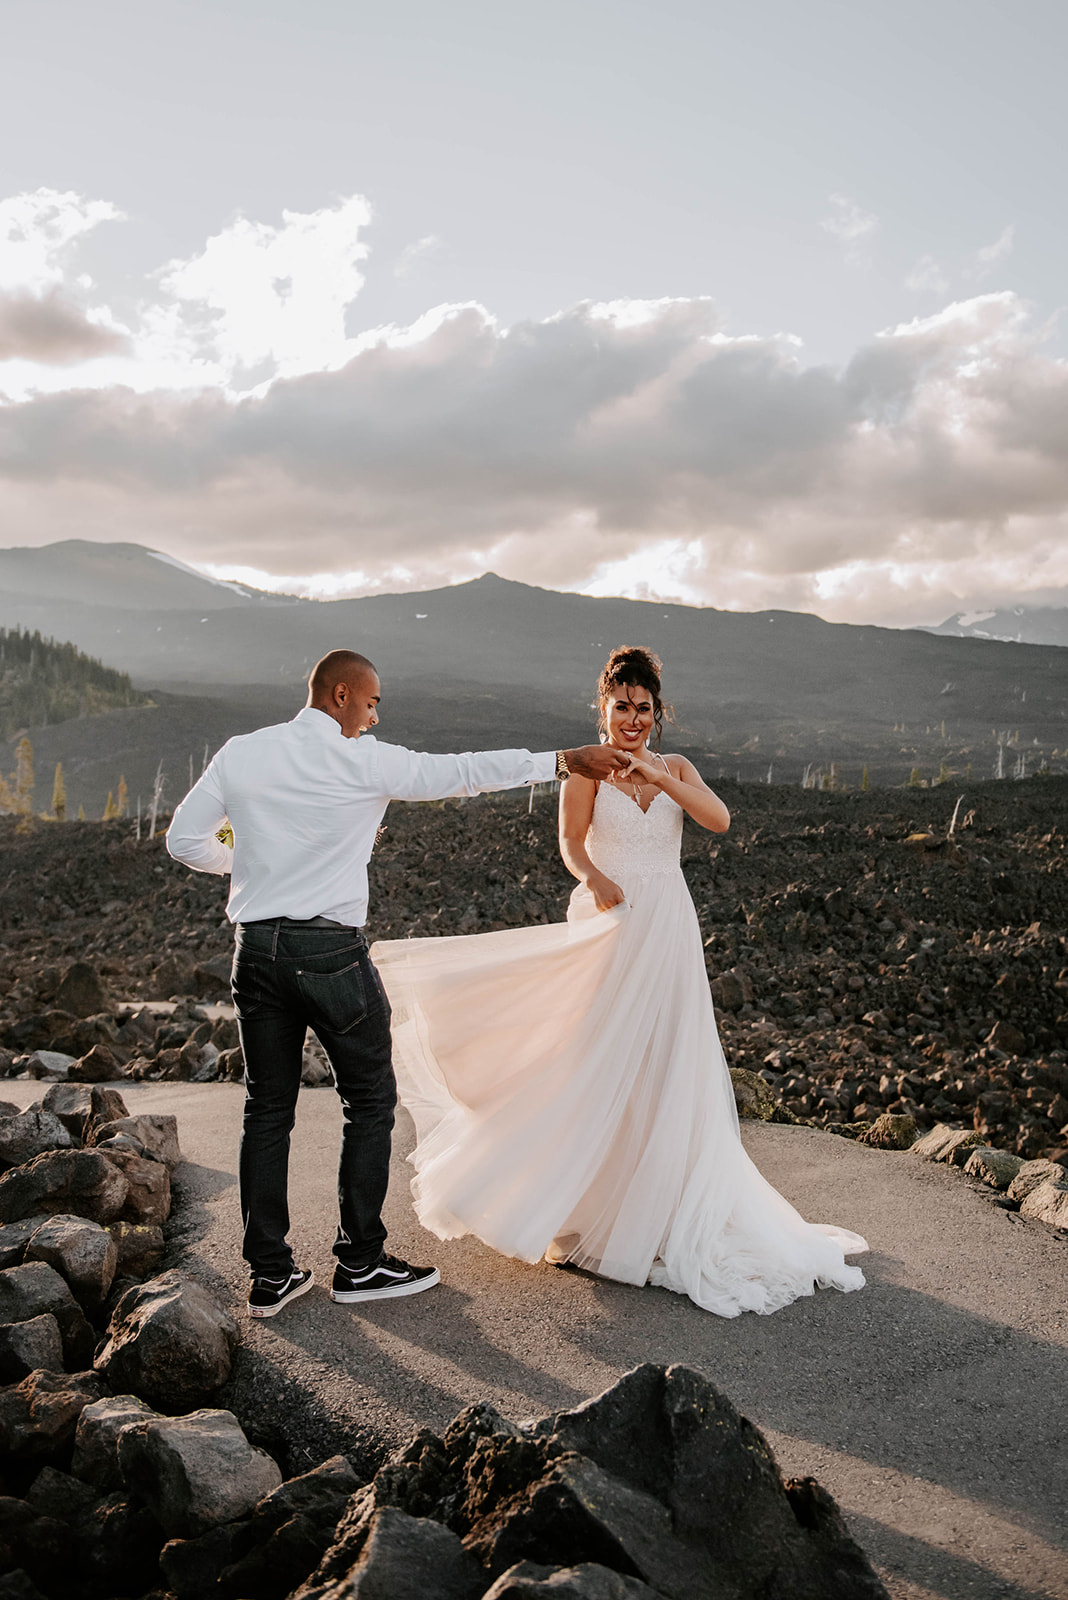 A couple who eloped at the Oregon lava beds dancing at sunset